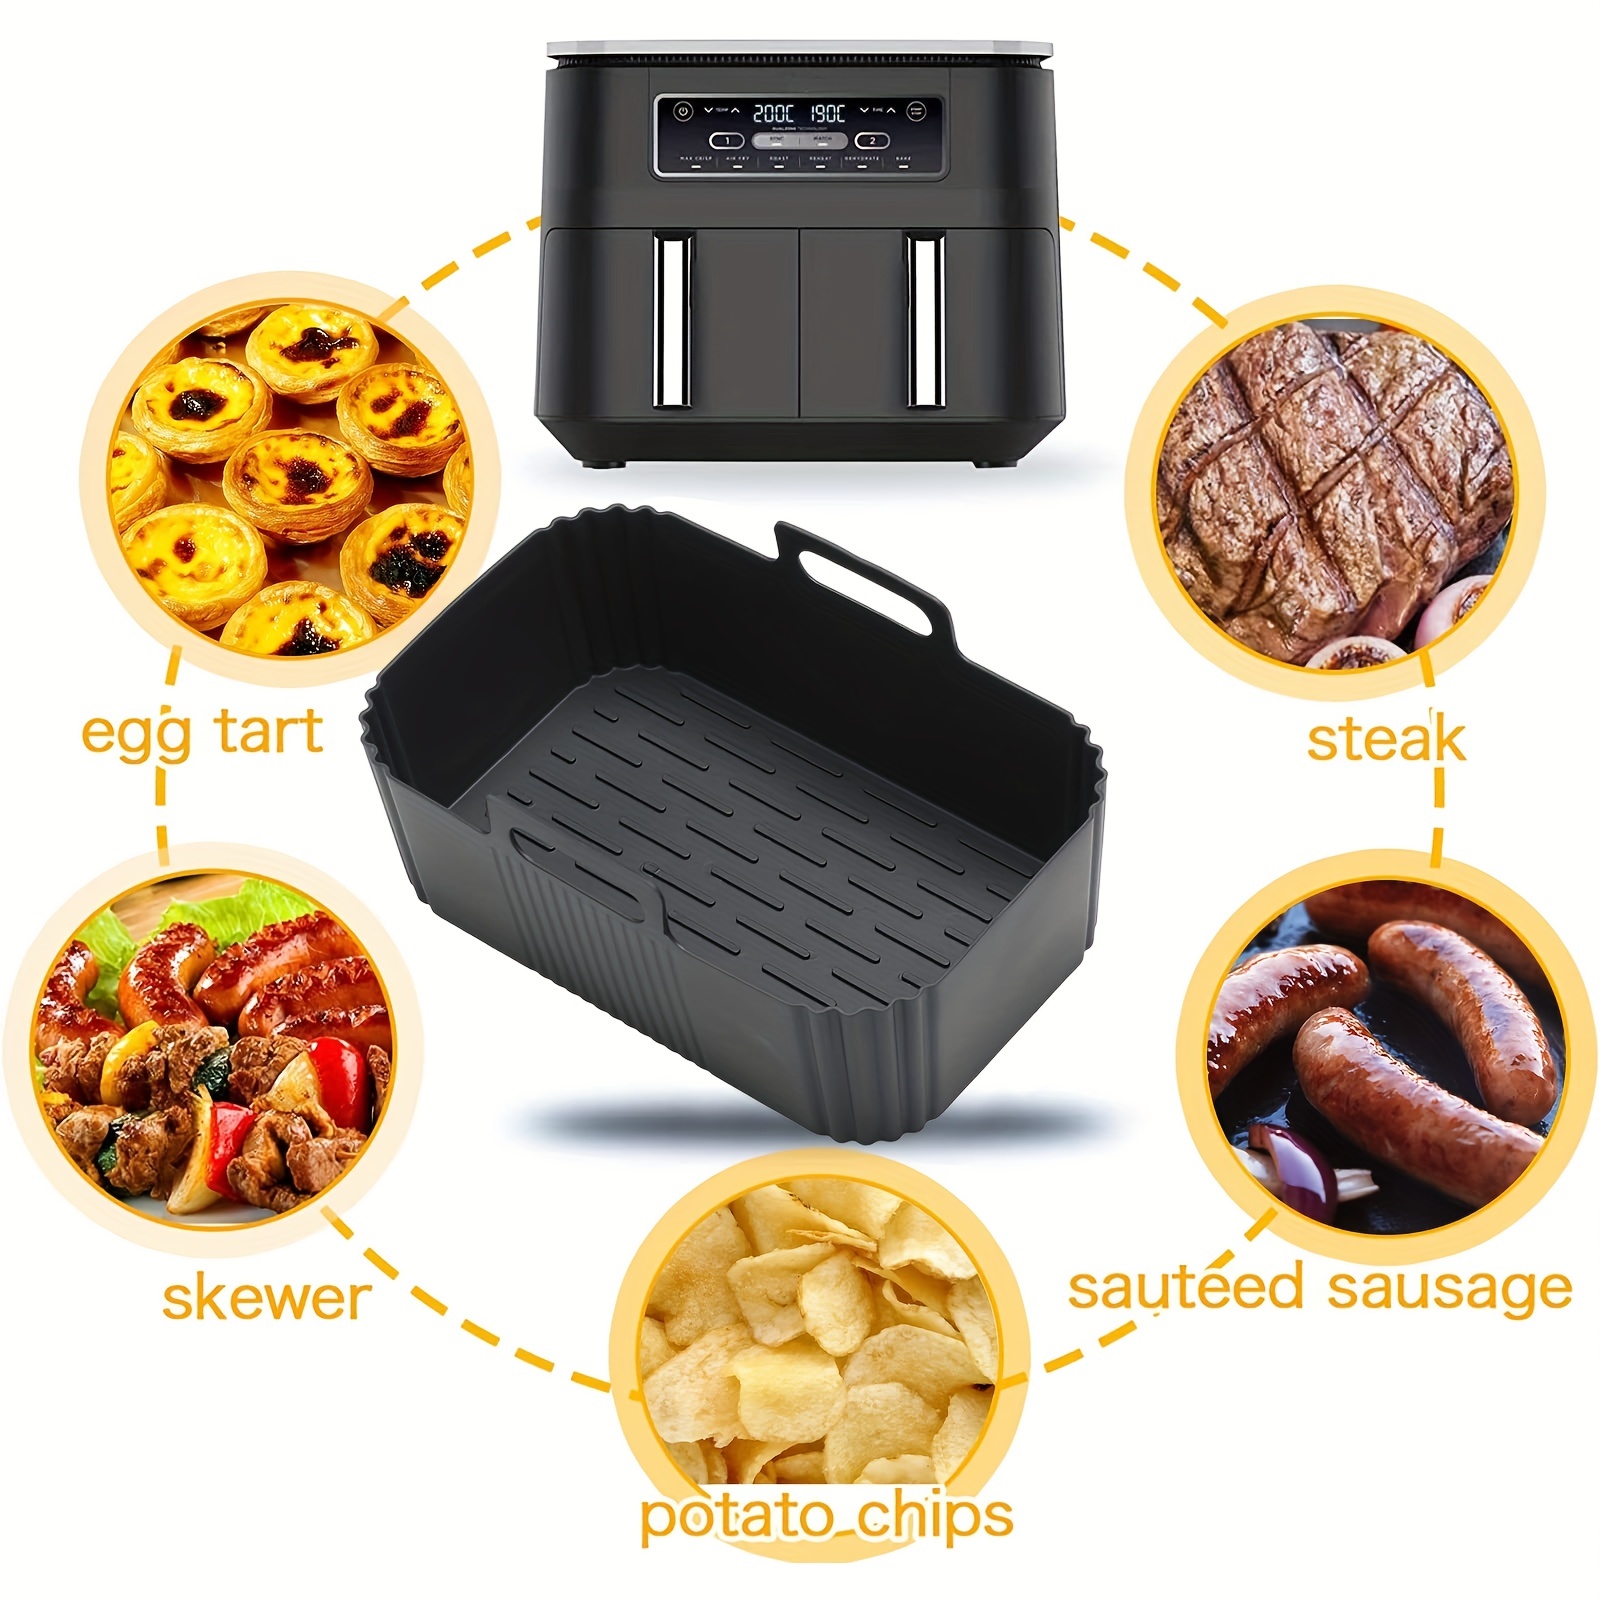  10QT Air Fryer Silicone Liners, MMH 2Pcs Rectangular Airfryer  Silicone Pot Baking Tray Reusable Replacement Basket Insert for Ninja DZ401/DZ550, Non-stick, Easy Cleaning, Food Safe